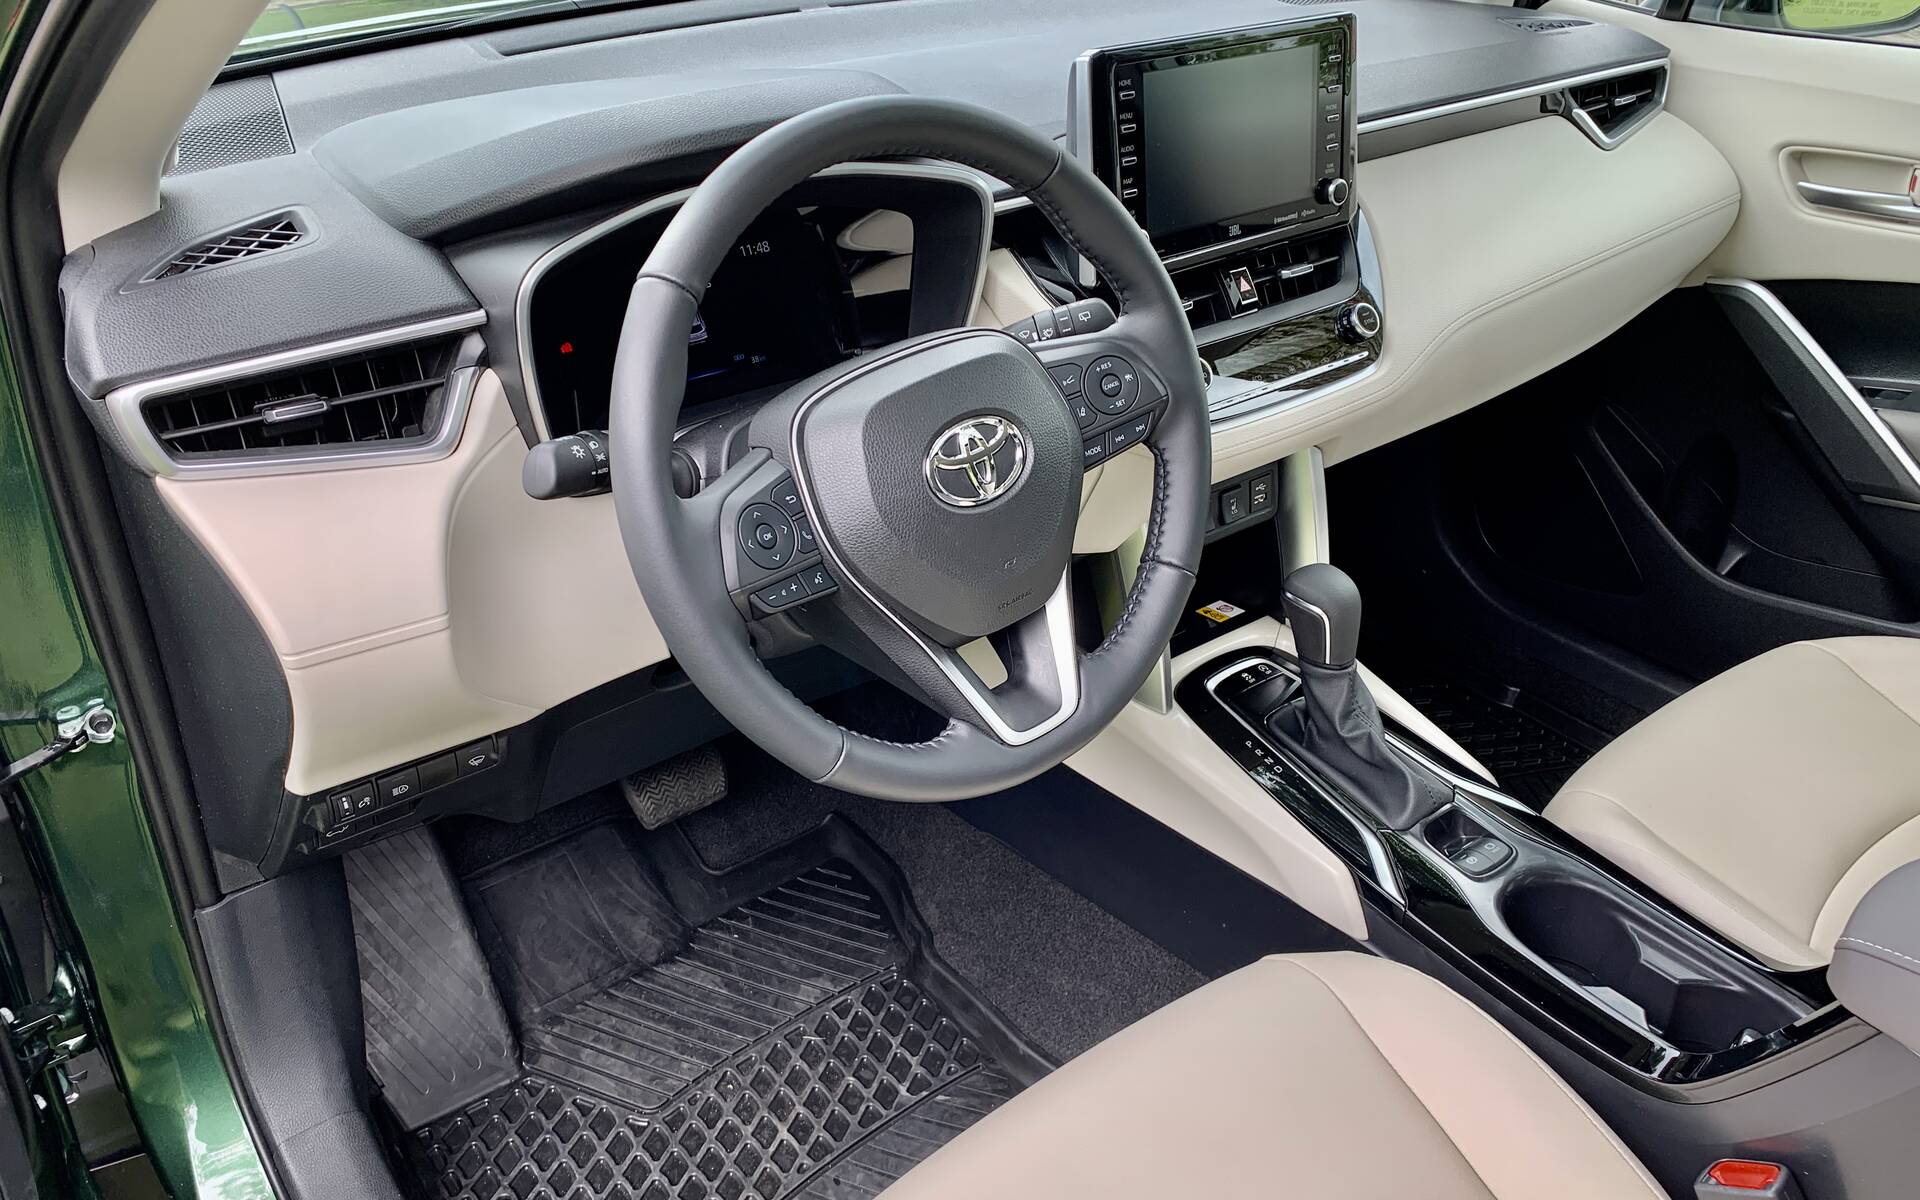 2022 Toyota Corolla Cross: A Closer Look at Toyota's Small New SUV